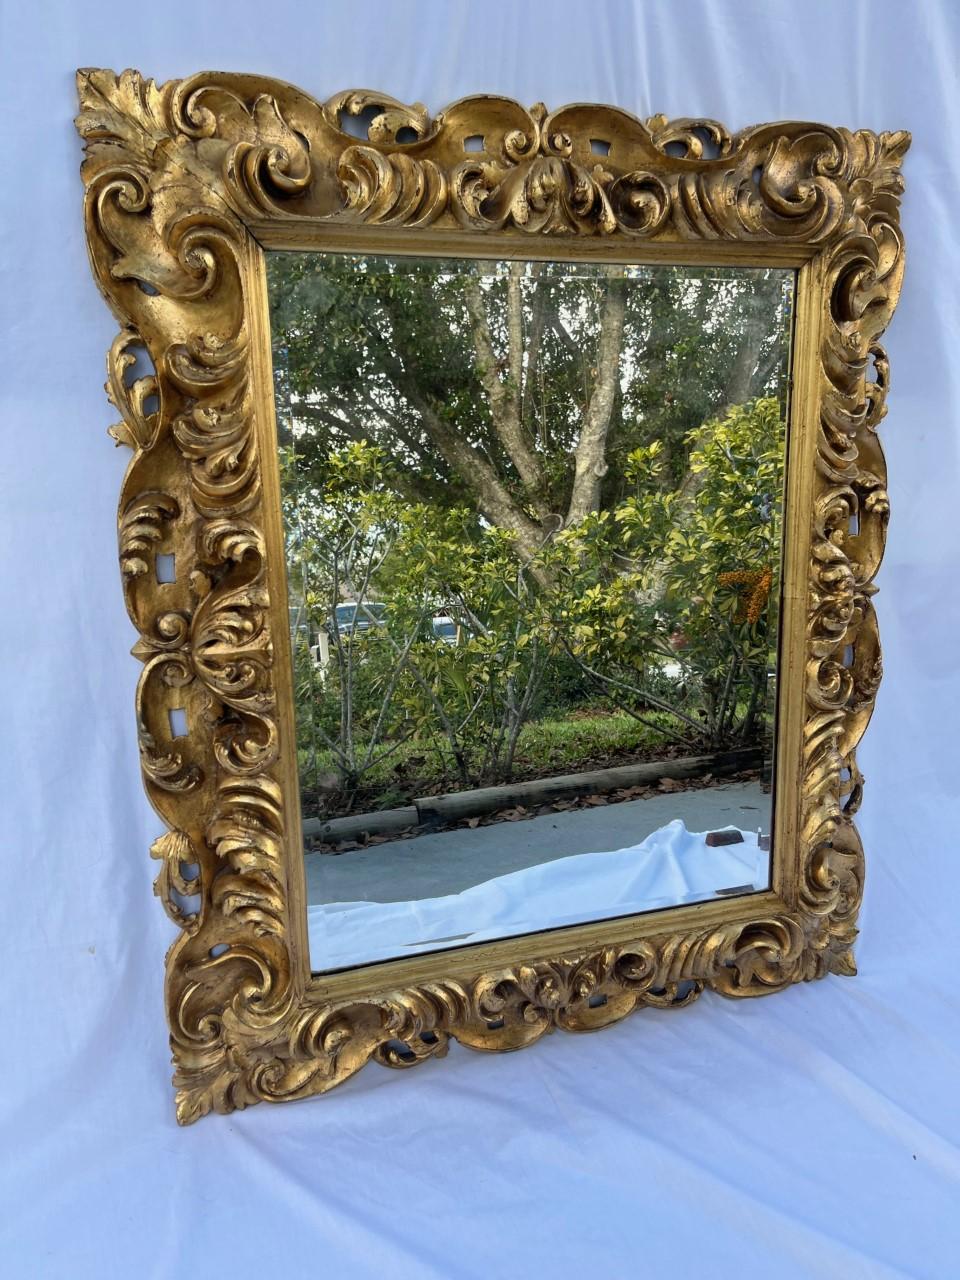 Late 18th Century Baroque Florentine Hand Carved Giltwood mirror

Large late 18th century spectacular Baroque period mirror, profusely hand carved foliate giltwood frame. This artisan used the Italian technique of intaglio for the Medicean design.